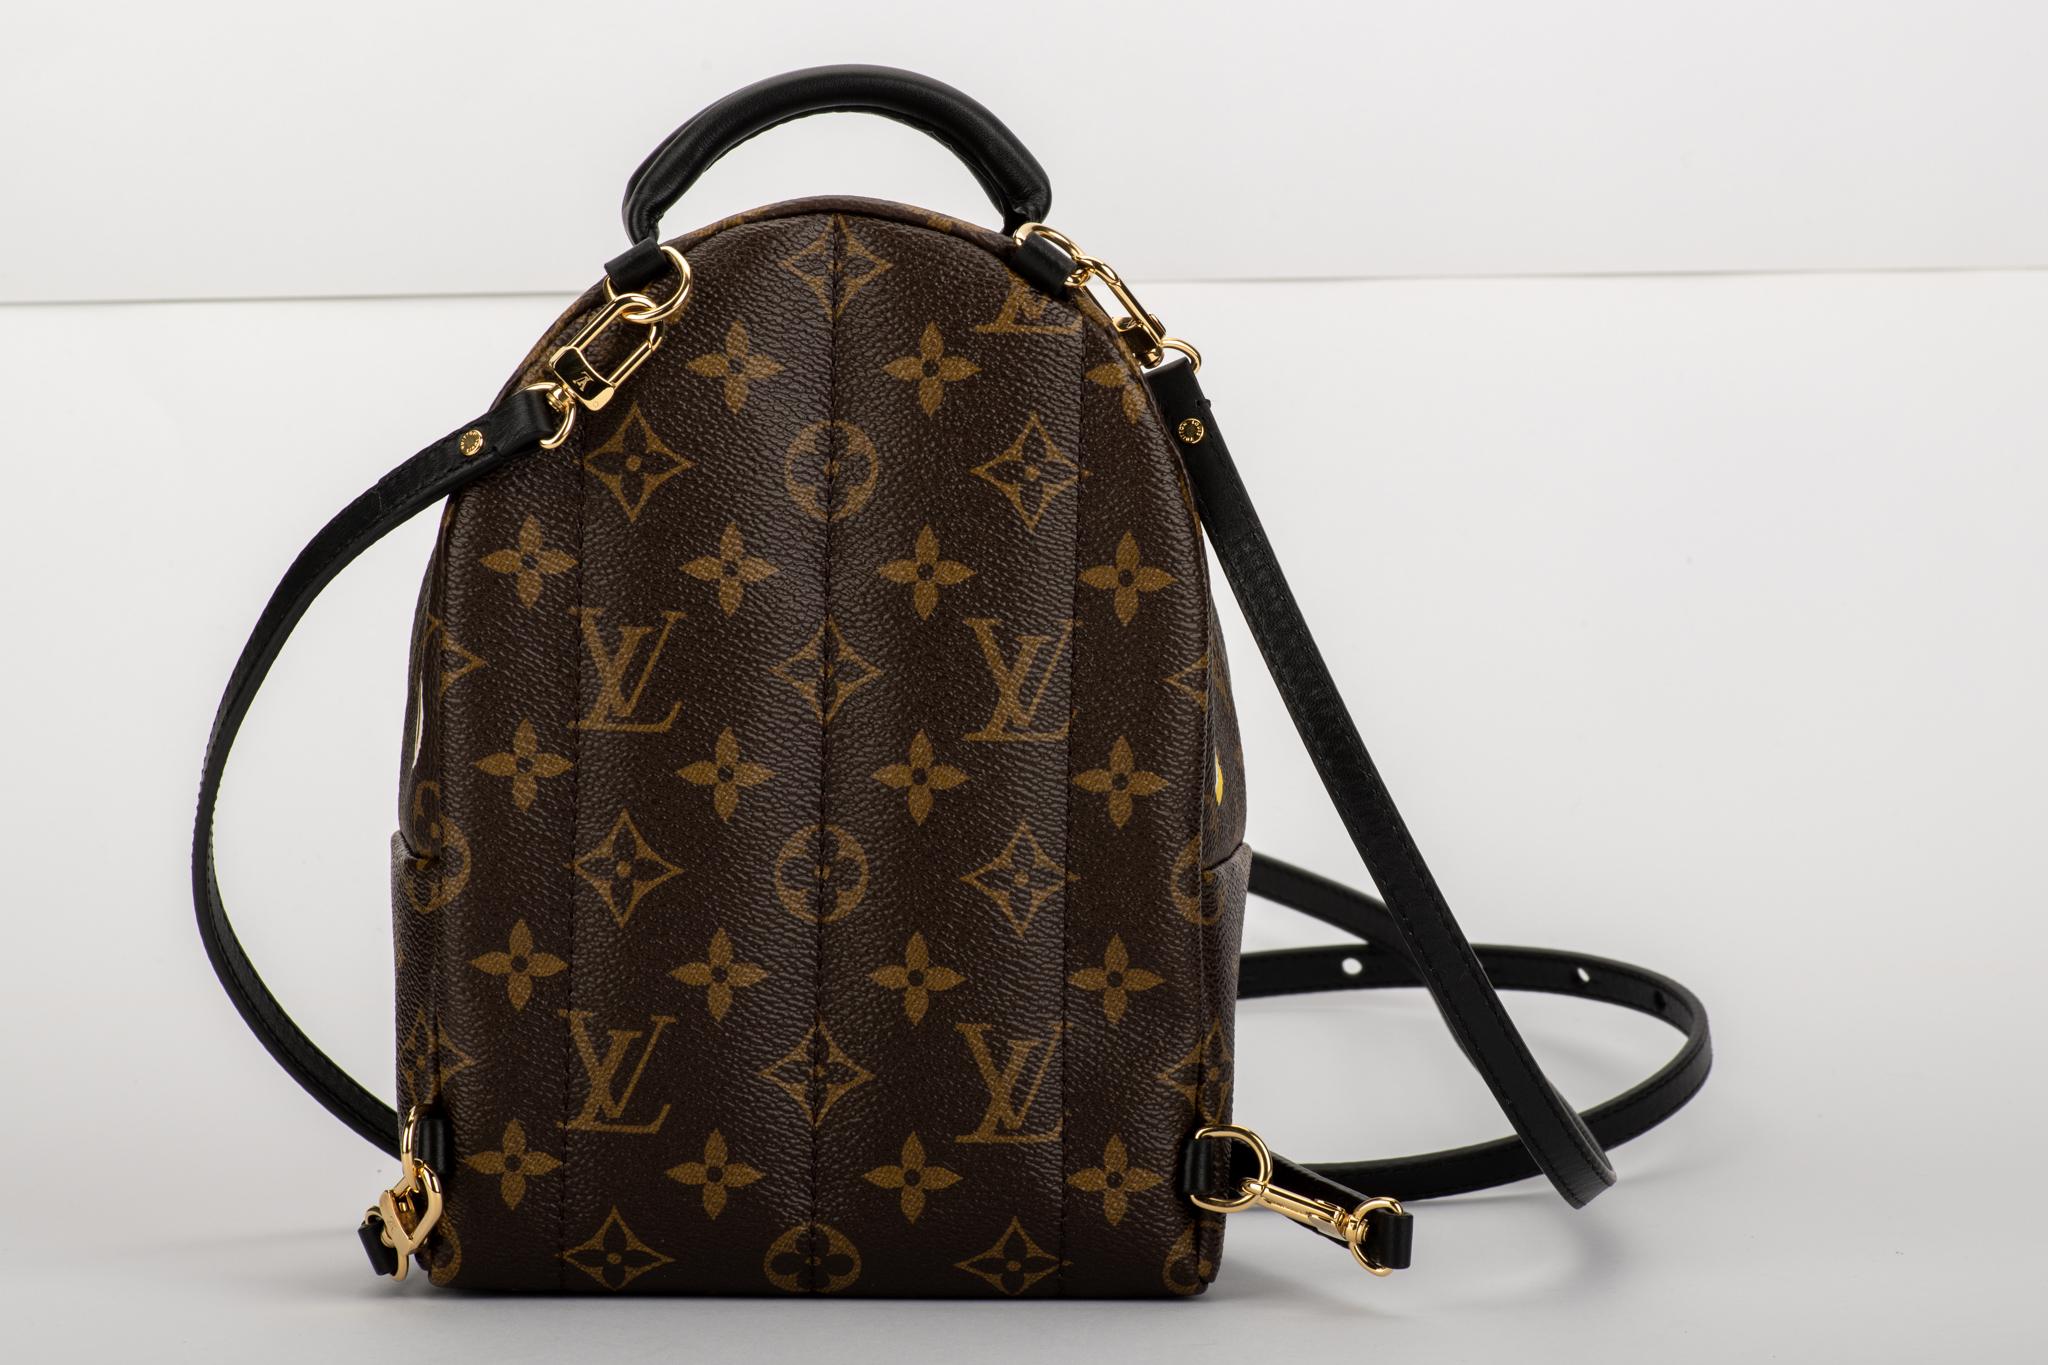 louis vuitton limited edition backpack